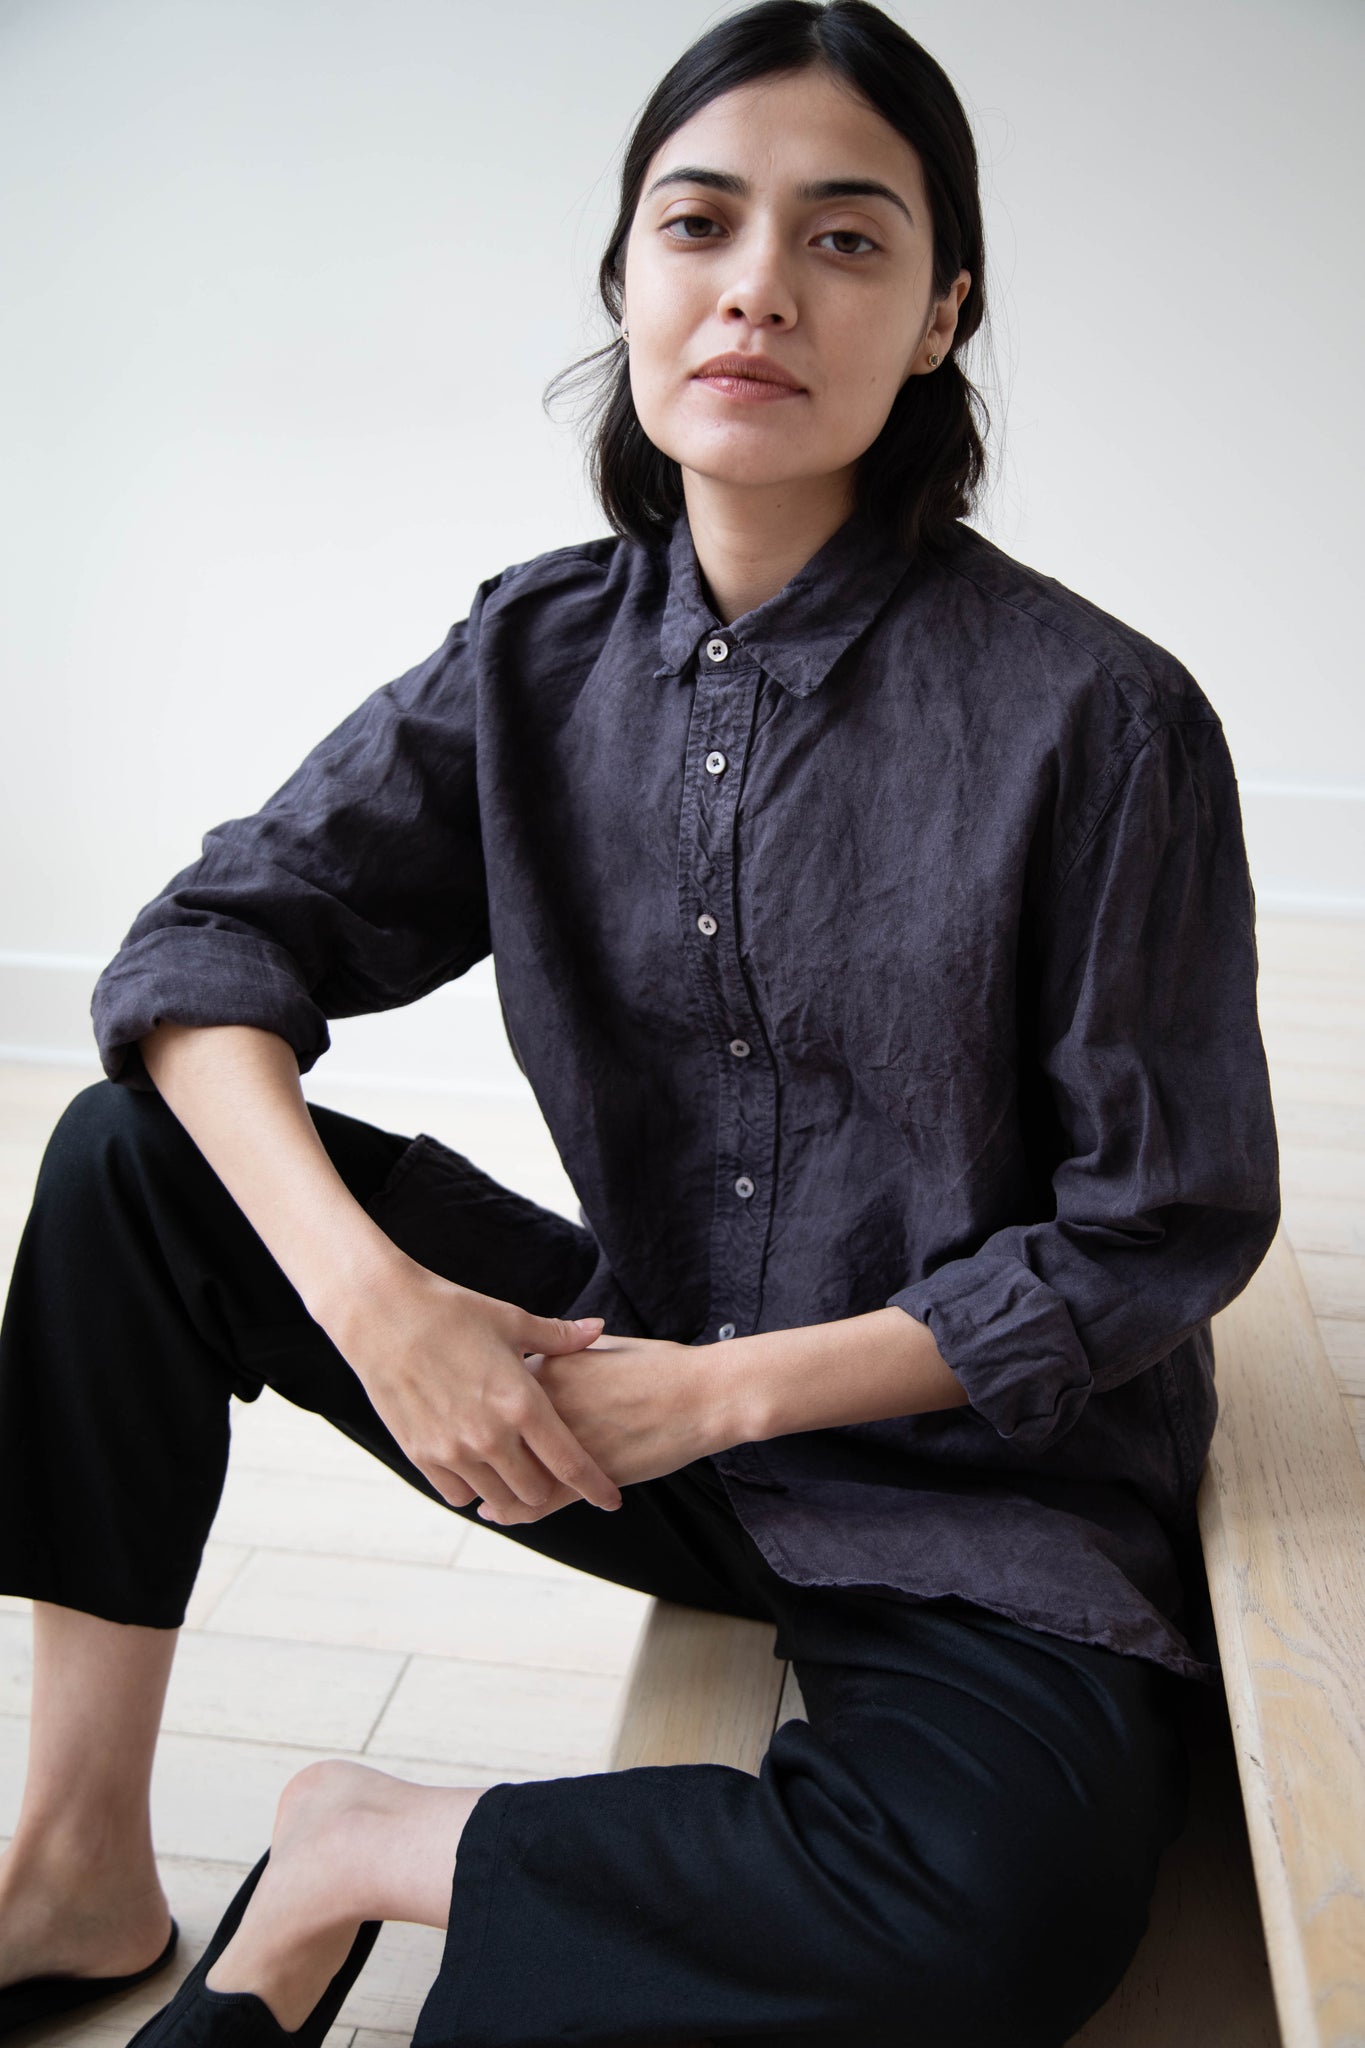 Oliver Church | Scalloped Shirt in Anthracite Antique Linen